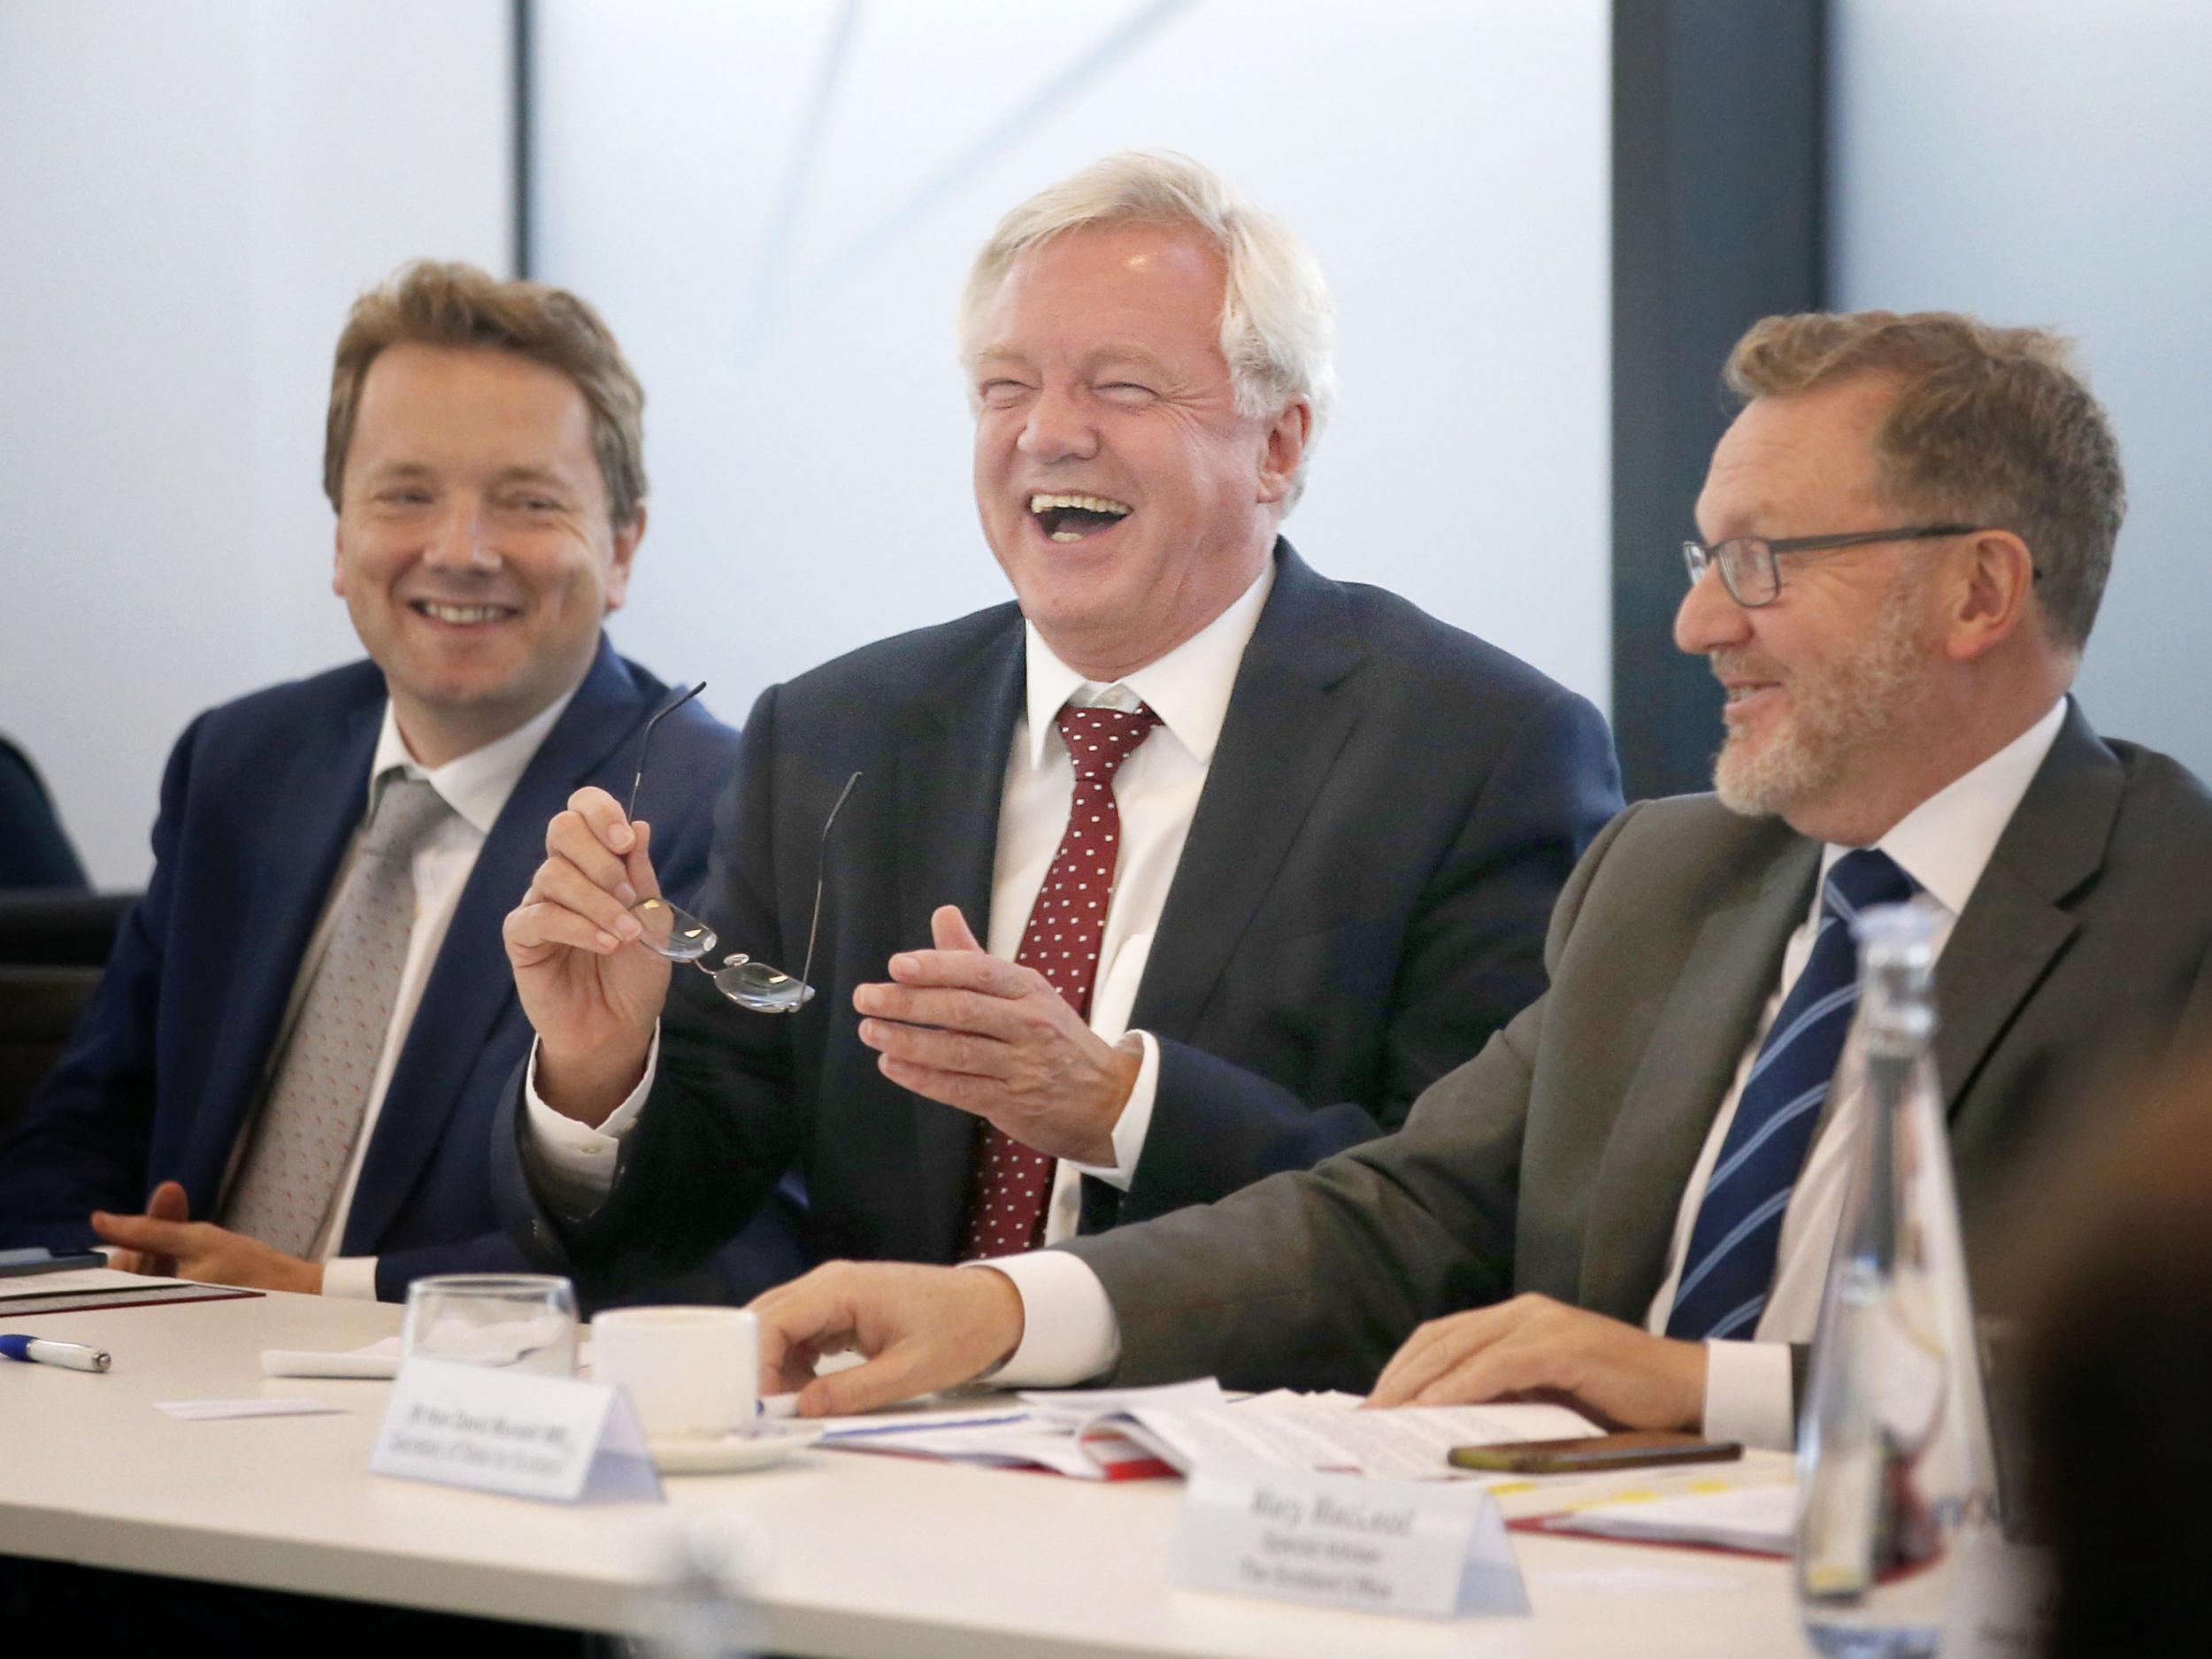 David Davis appears to be reverting to the ‘have our cake and eat it’ approach to negotiations